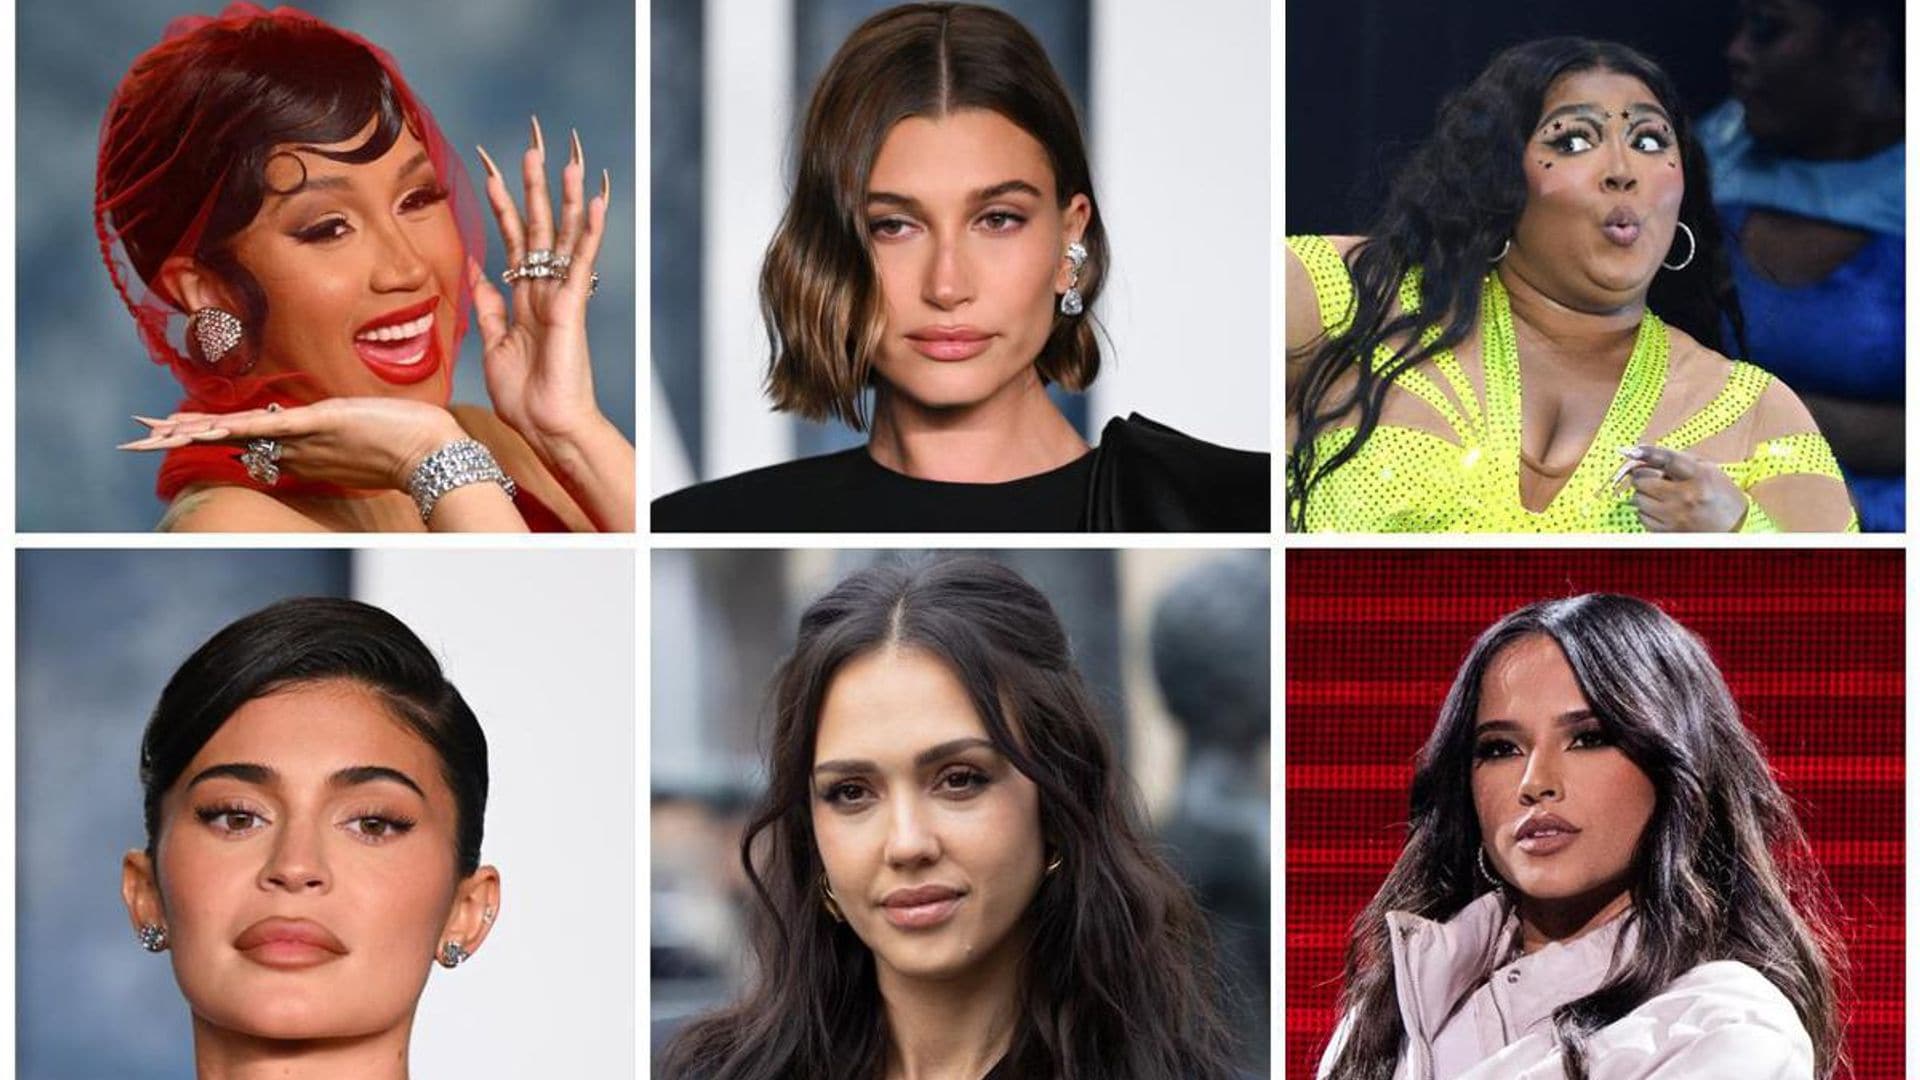 Watch the 10 Best Celebrity TikToks of the Week: Hailey Bieber, Britney Spears, Cardi B, and more